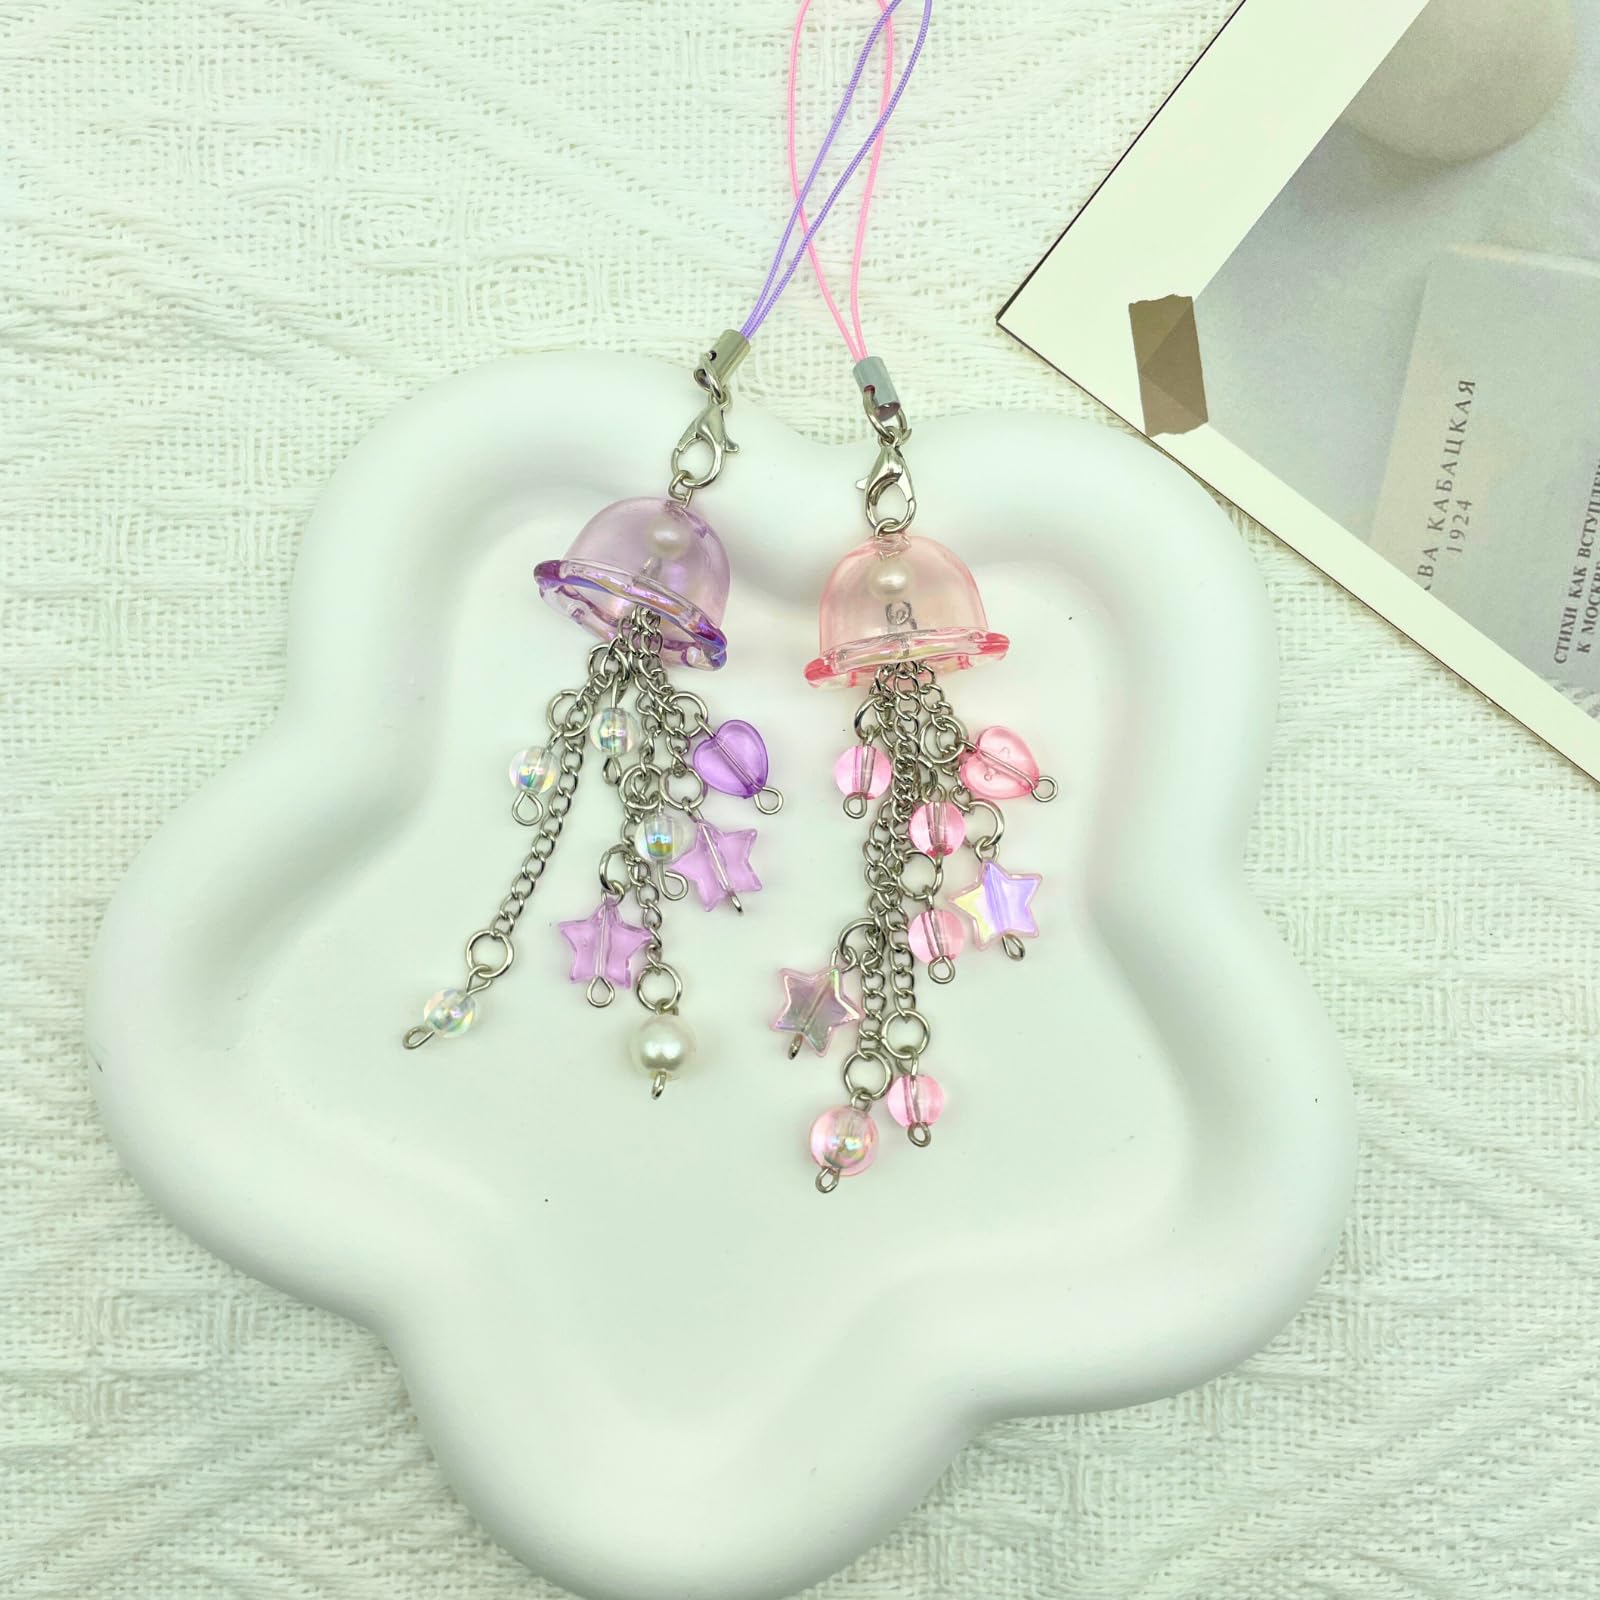 Jellyfish Phone Charms Aesthetic Y2K Cell Phone Charm Cute Strap Accessories with Star and Heart for Phone Bag Keychain Camera Pendants Decor (Purple)